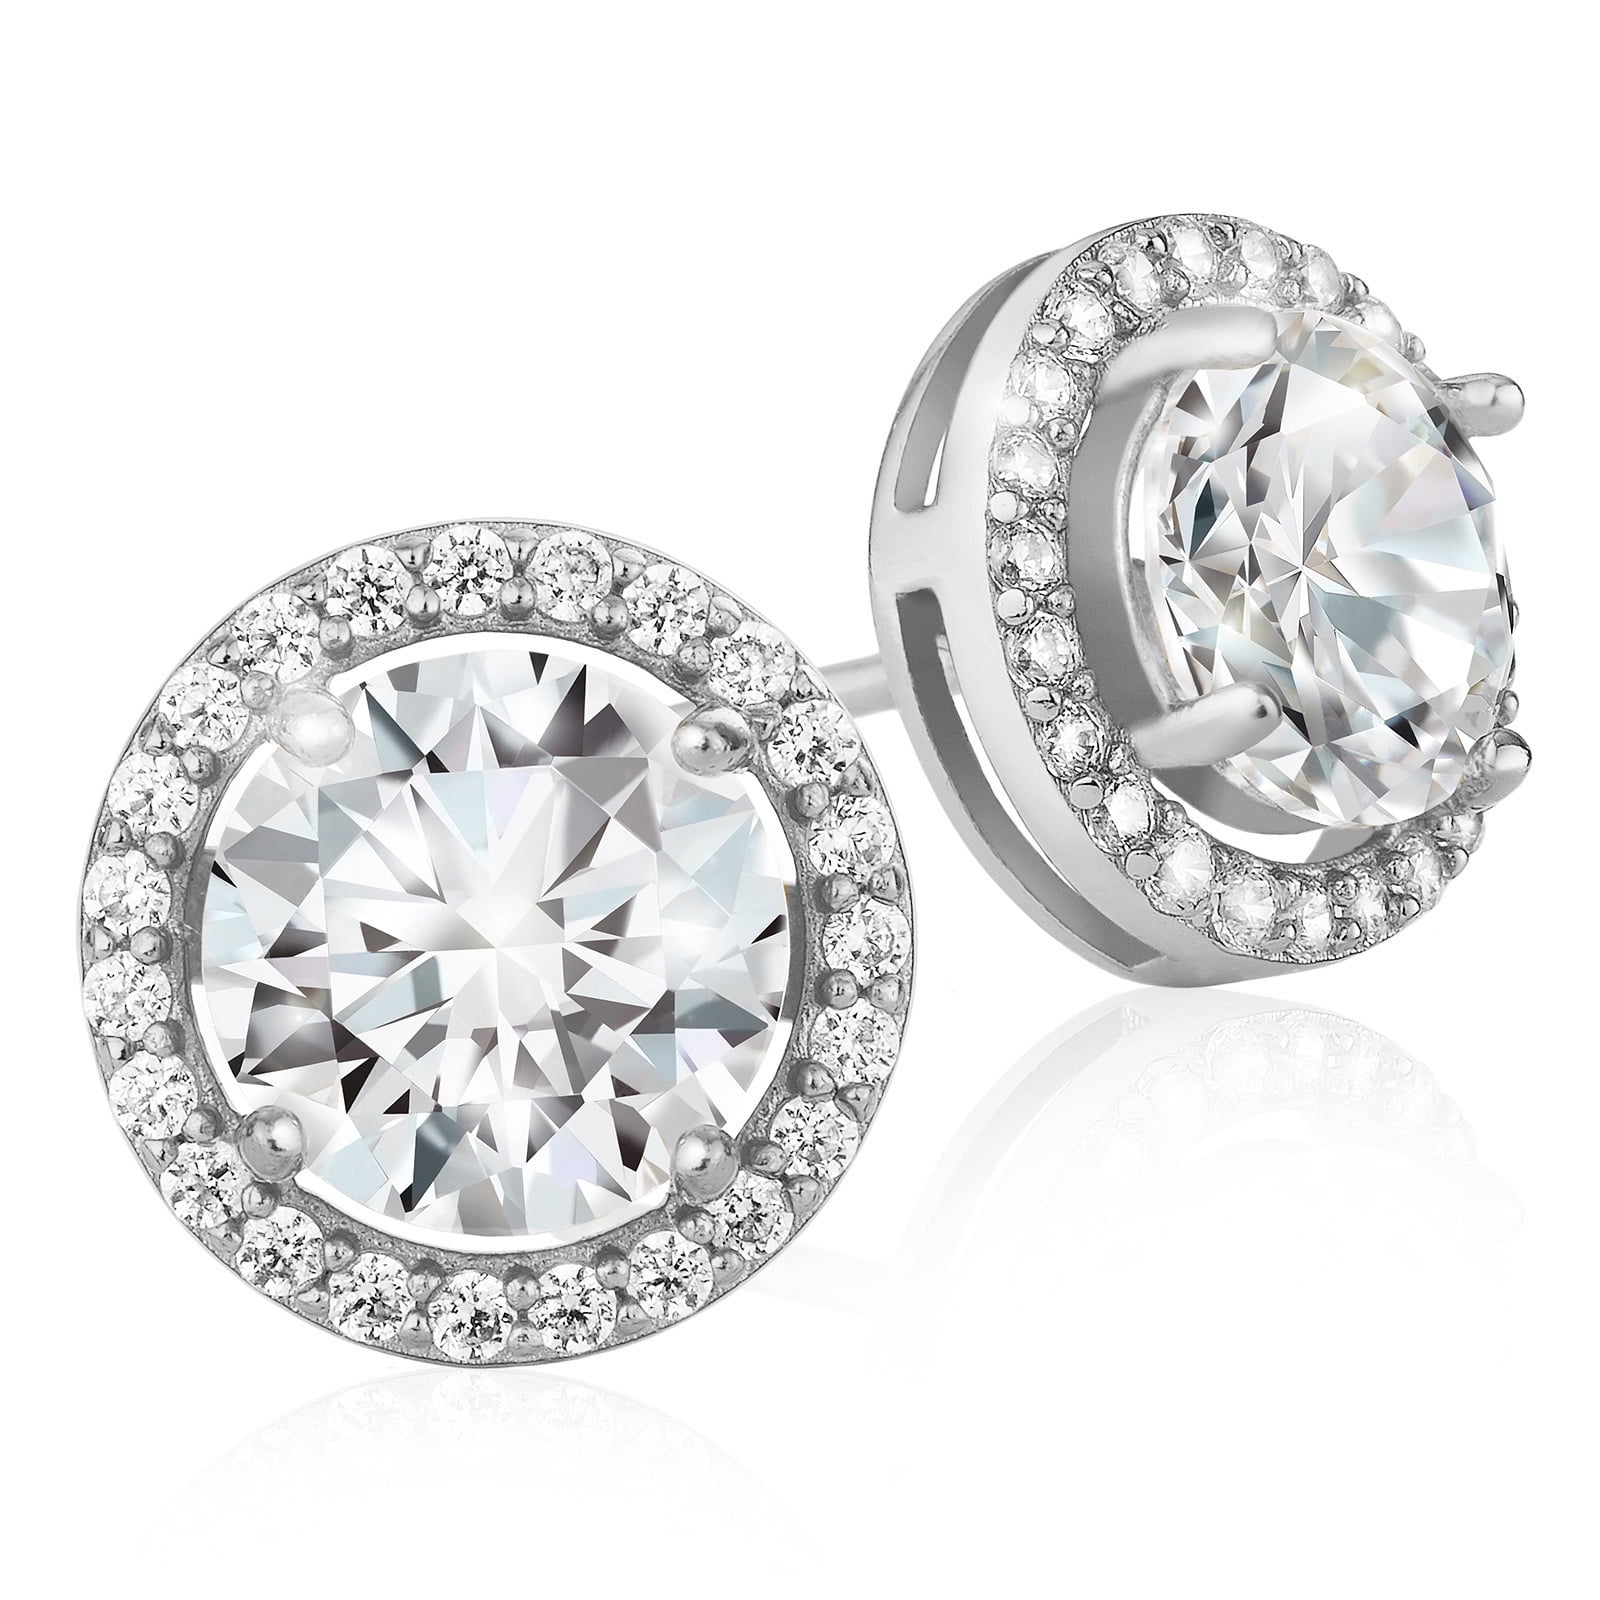 14K White Gold Round Cubic Zirconia Halo Stud Earrings